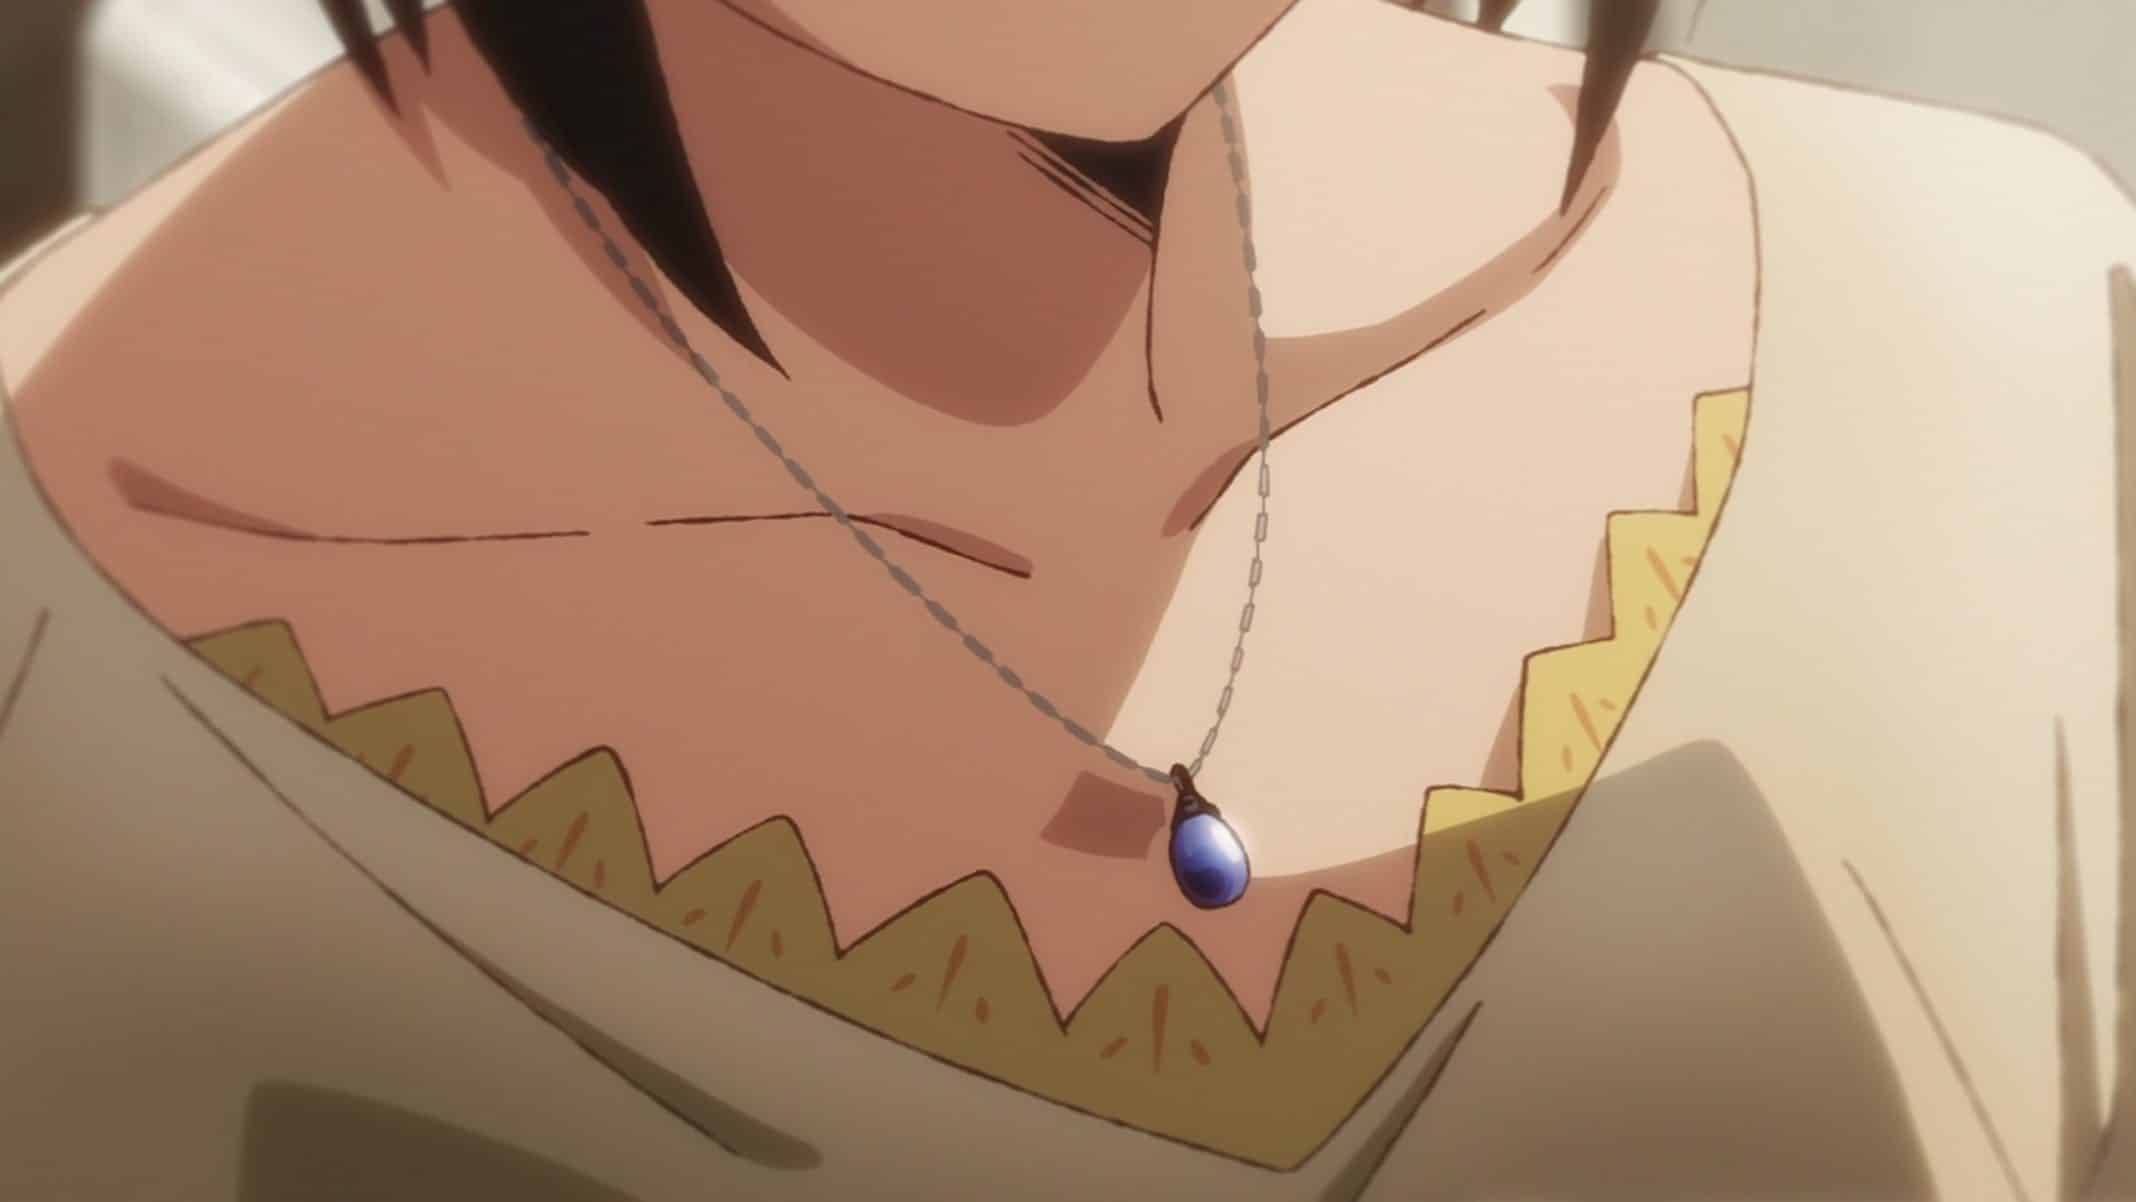 Shinako with a necklace that Rikuo gave her.